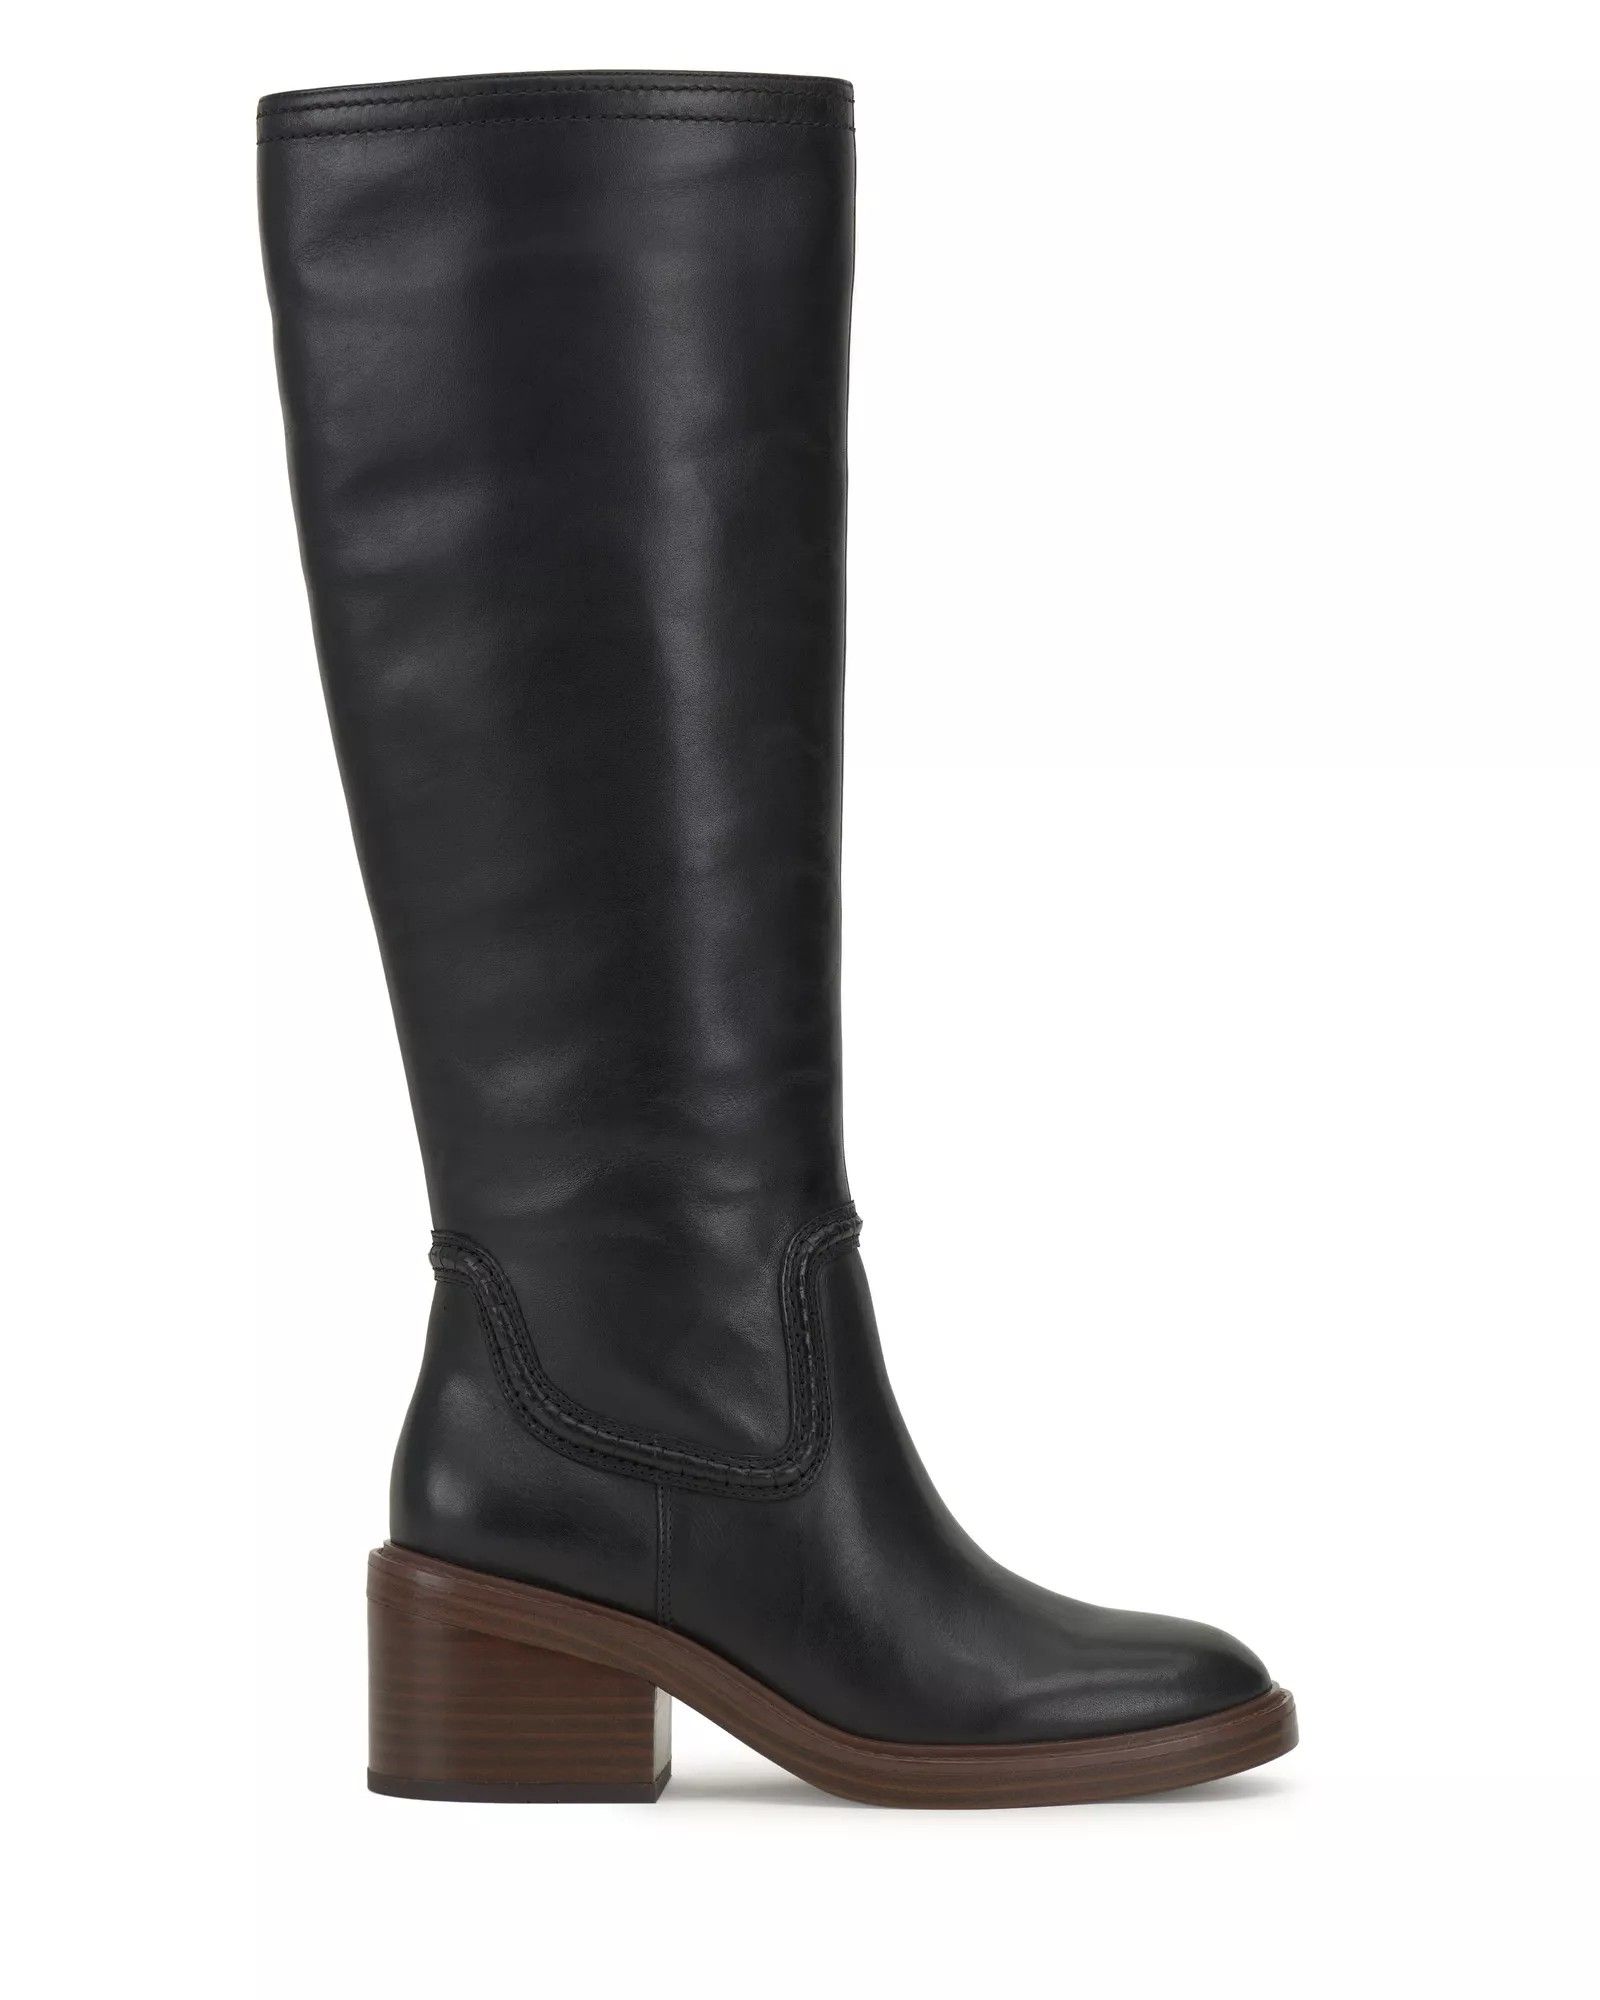 Vince Camuto Vuliann Boot | Vince Camuto